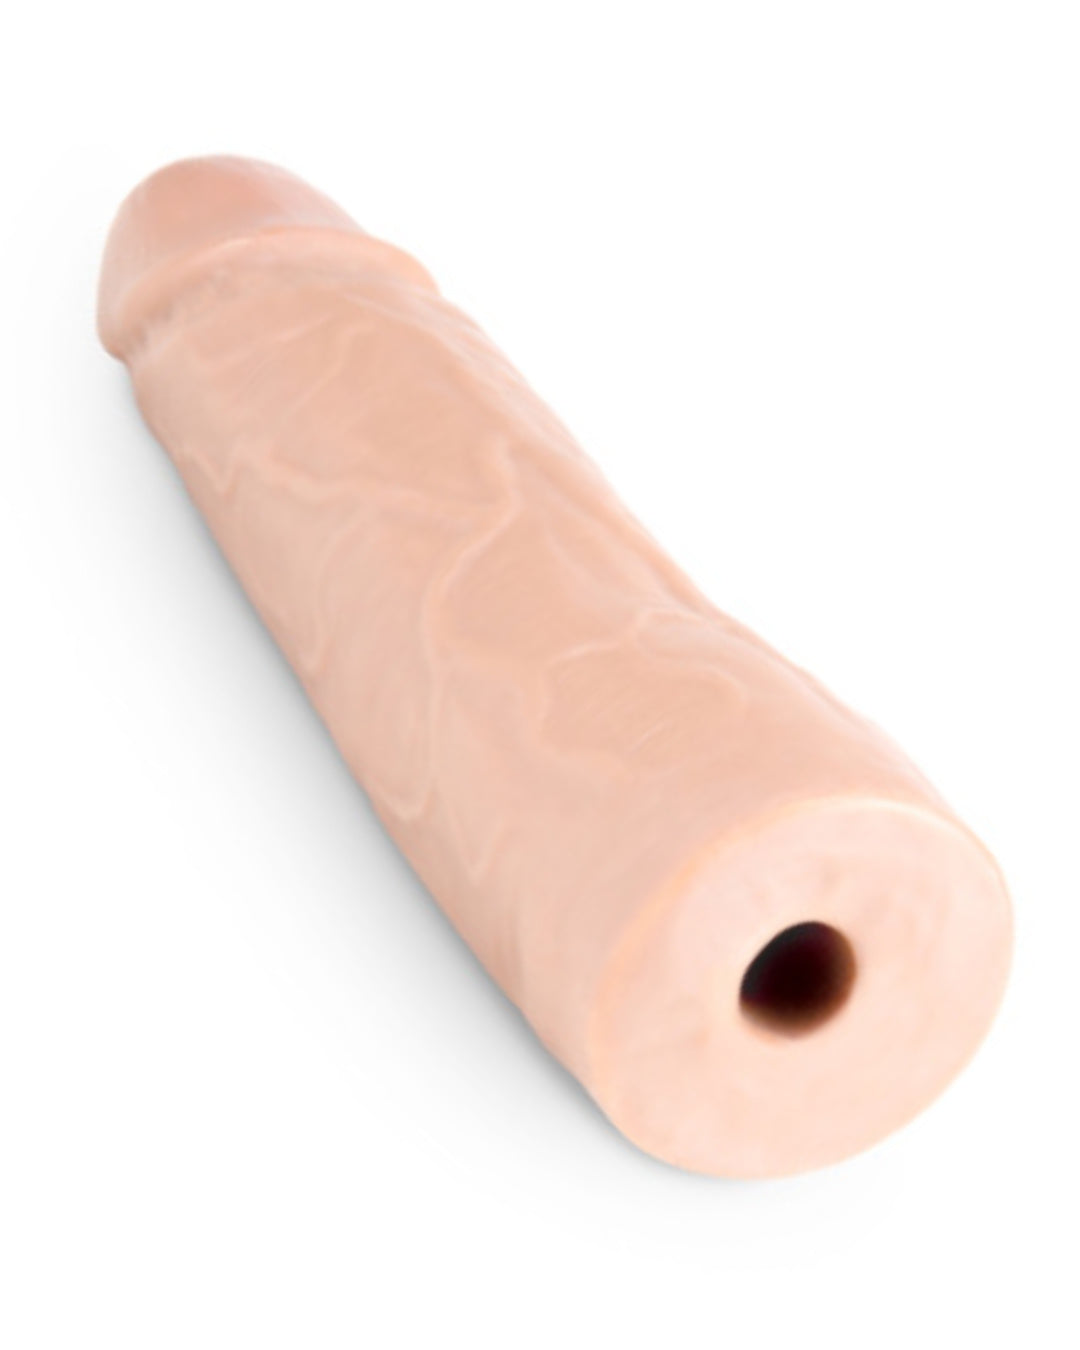 Lock On 7 Inch Realistic Lock On Dildo by Blush Novelties - Vanilla showing the lock on end